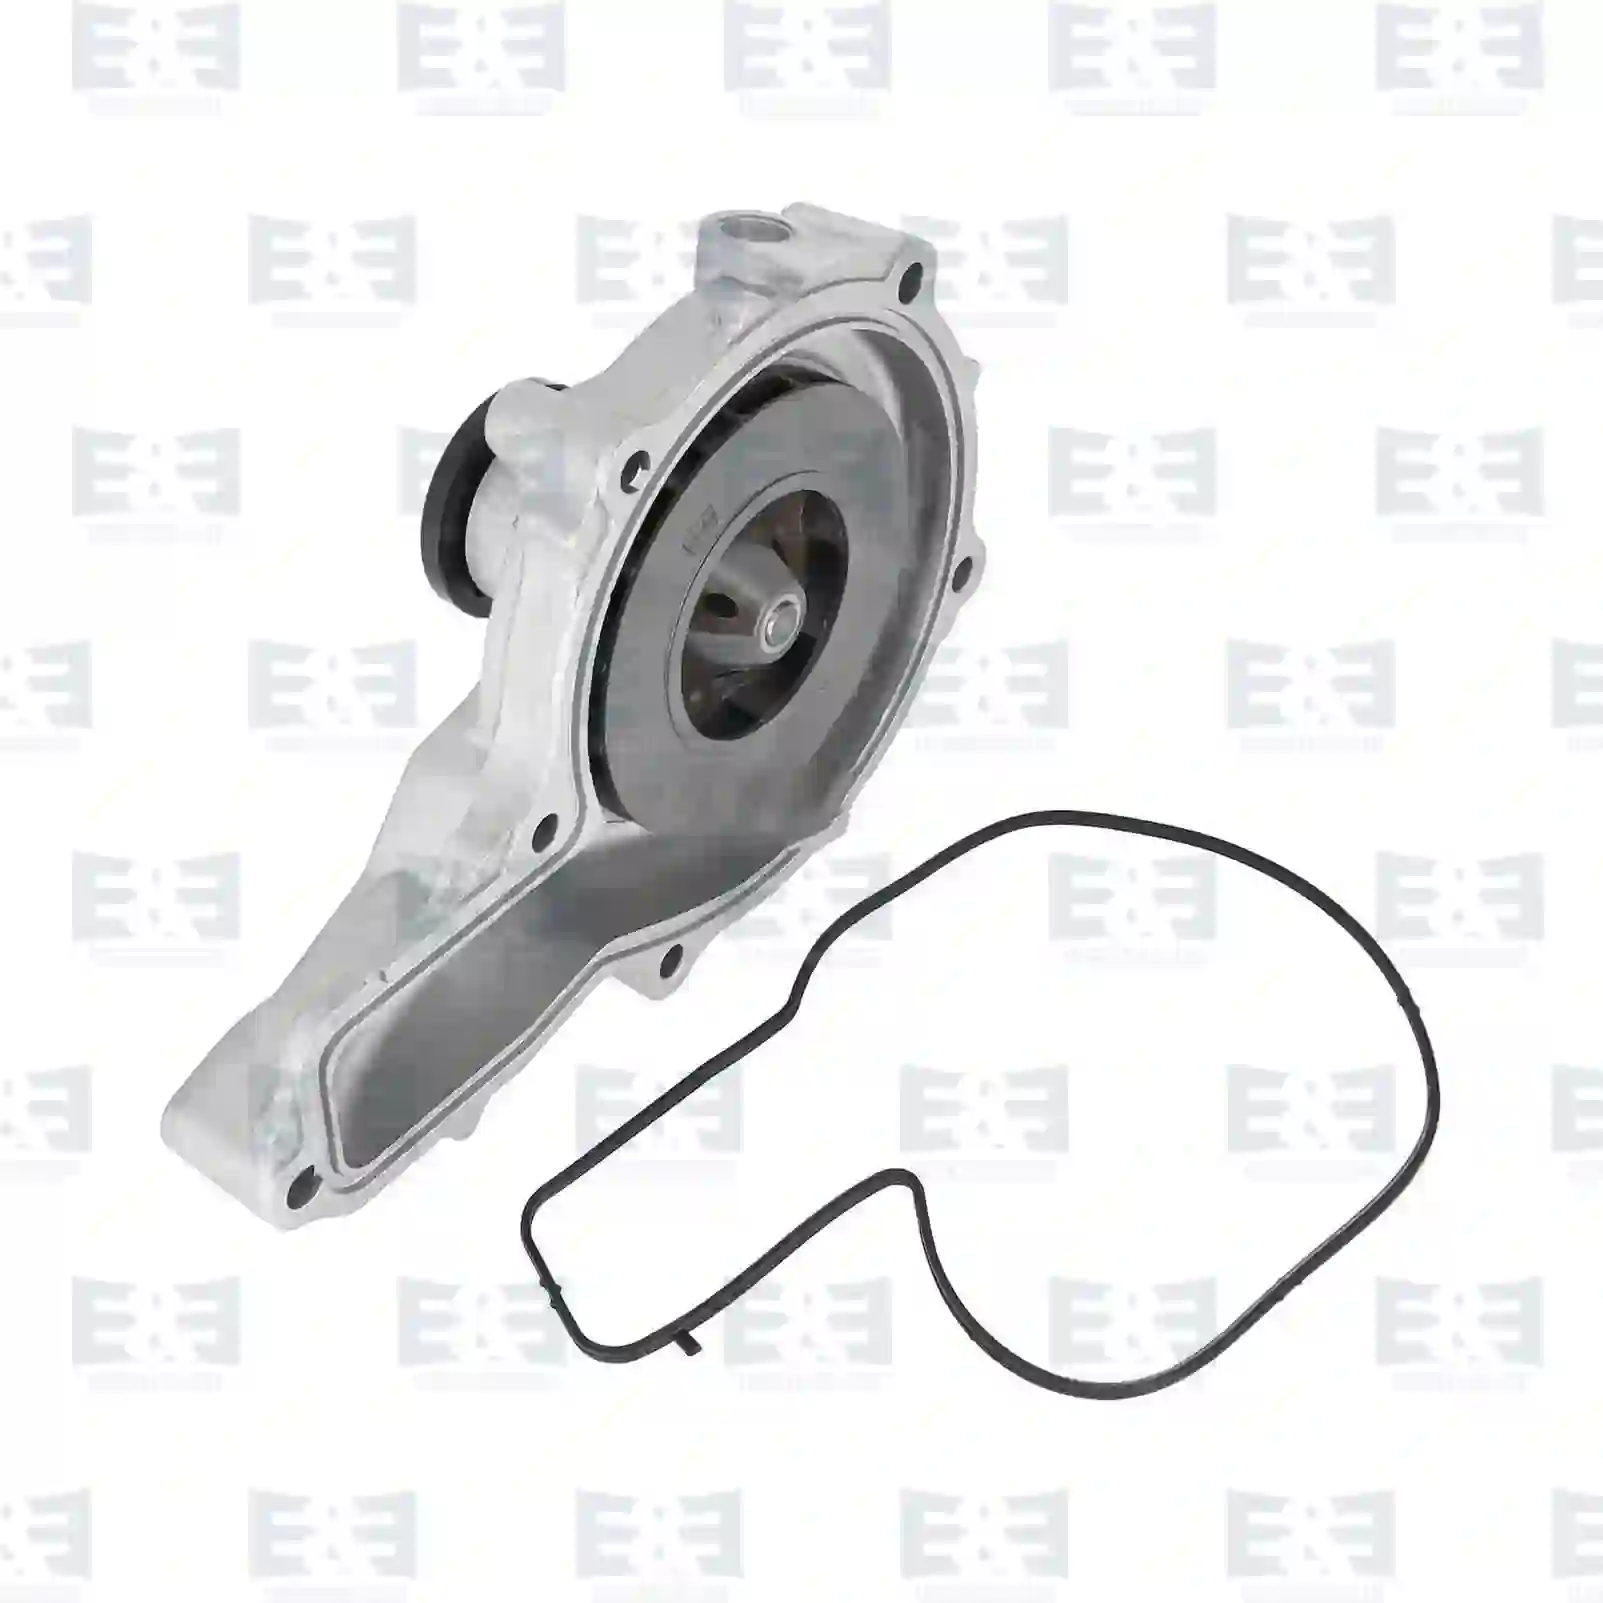 Water Pump Water pump, without pulley, EE No 2E2203982 ,  oem no:20744944, 21228795, 21468472, 22195450, 85003160, 85003709, 7420744939, 7420744940, 7421615952, 7422167707, 7422197707, 7485000763, 7485013068, 20451516, 20464403, 20538820, 20538845, 20744939, 20744940, 21221878, 21228793, 21468471, 21615952, 2201101, 22195450, 22197705, 22902431, 3161436, 3801102, 3801418, 3801484, 3803844, 3803930, 85000062, 85000347, 85000486, 85003125, 85003708, 85006062, 85020085, 85021450, ZG00771-0008 E&E Truck Spare Parts | Truck Spare Parts, Auotomotive Spare Parts